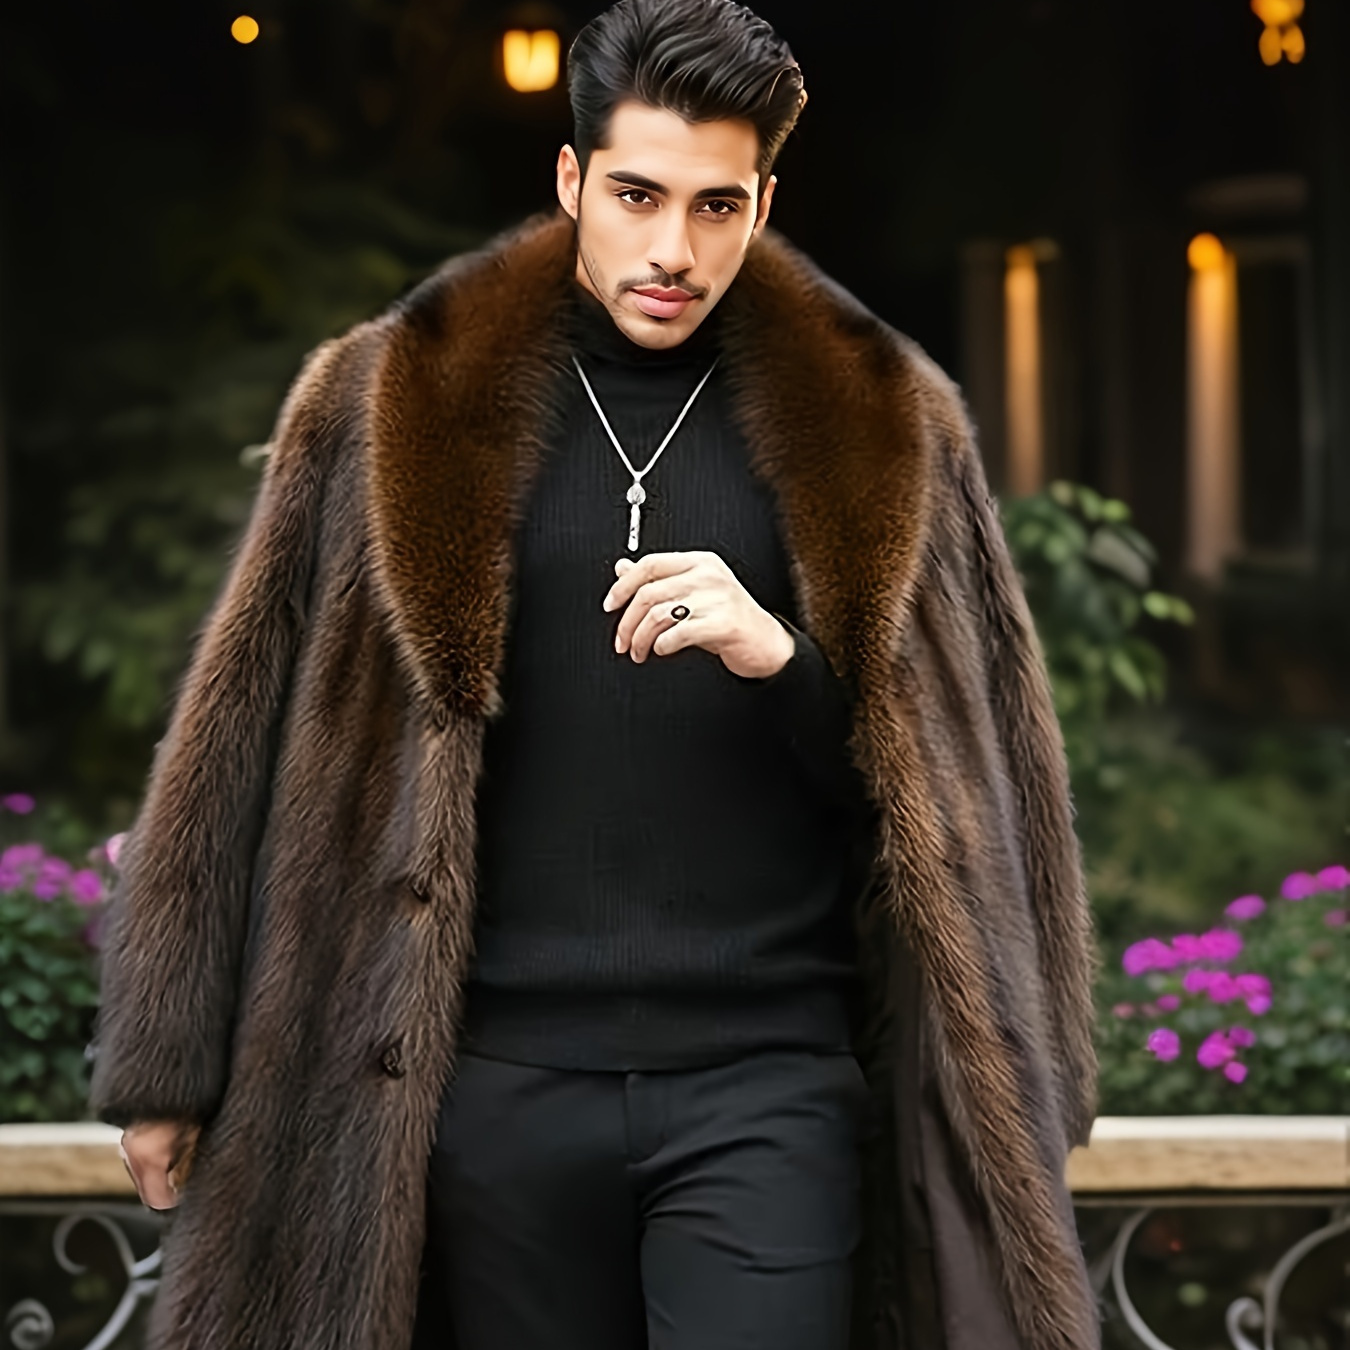 

Fashionable Design Men's Faux Fur Single Breasted Overcoat, Trendy And Elegant Warm Long Jacket For Autumn And Winter Outdoors Leisurewear